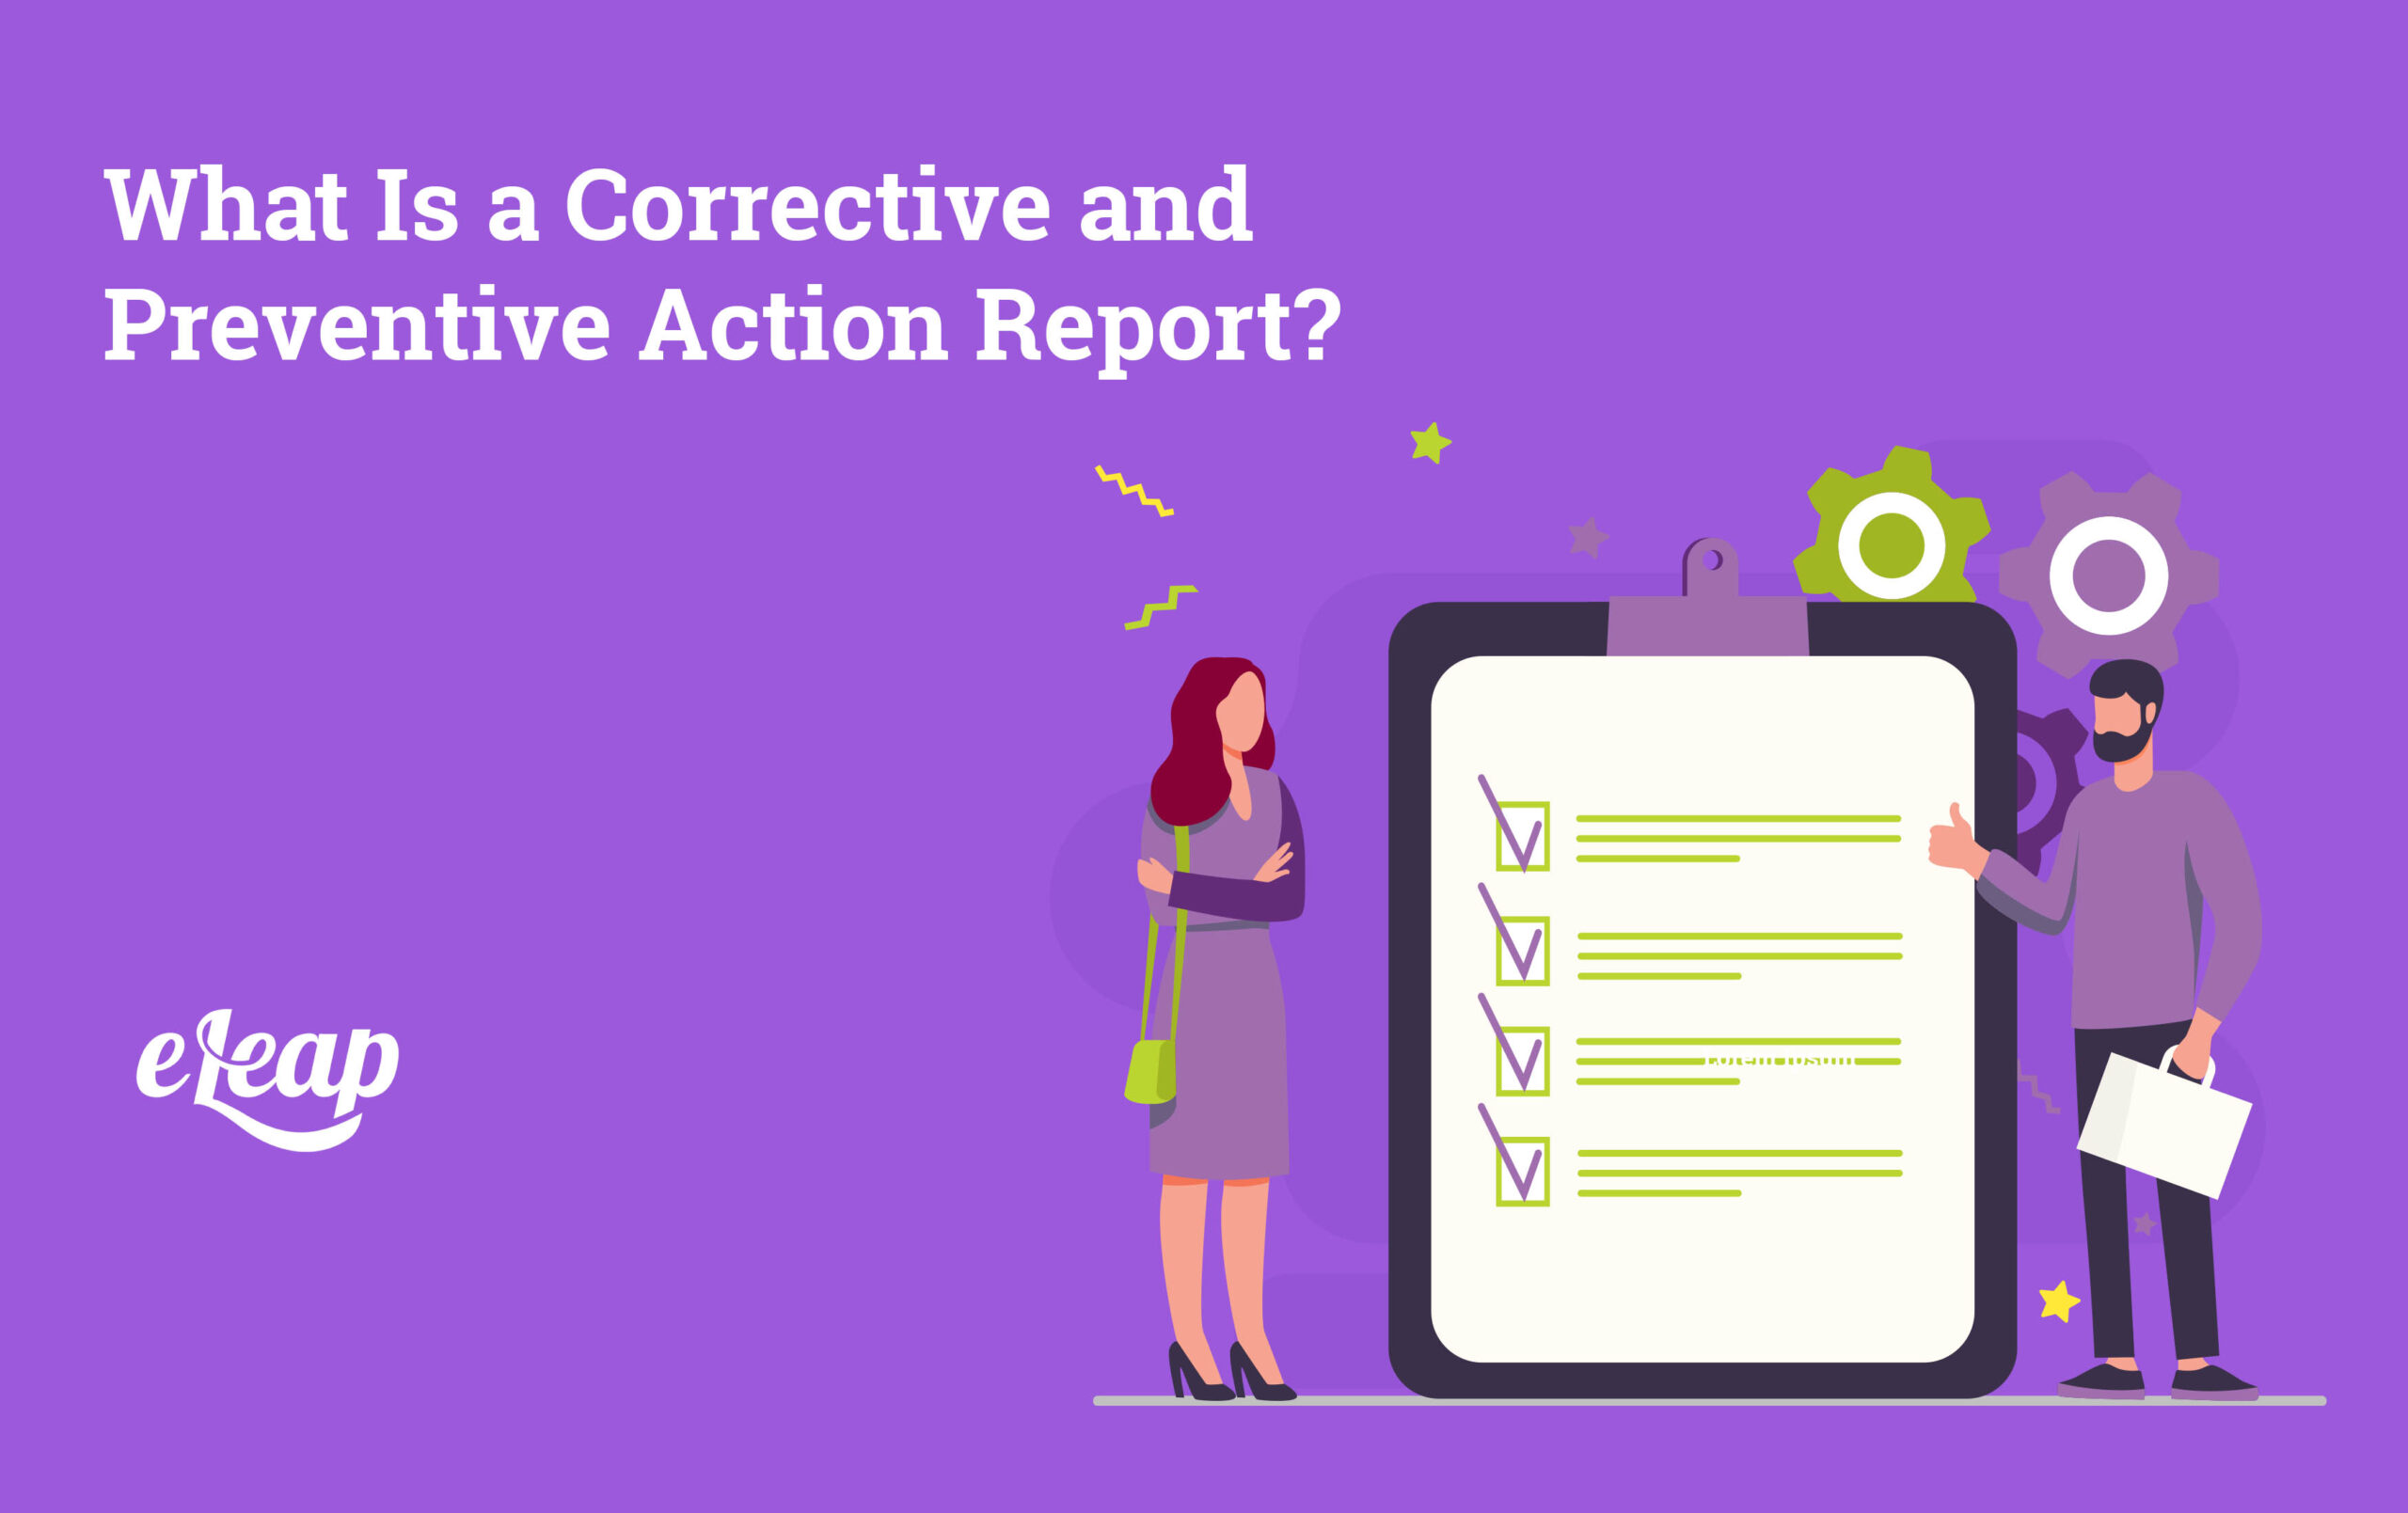 Corrective and Preventive Action Report